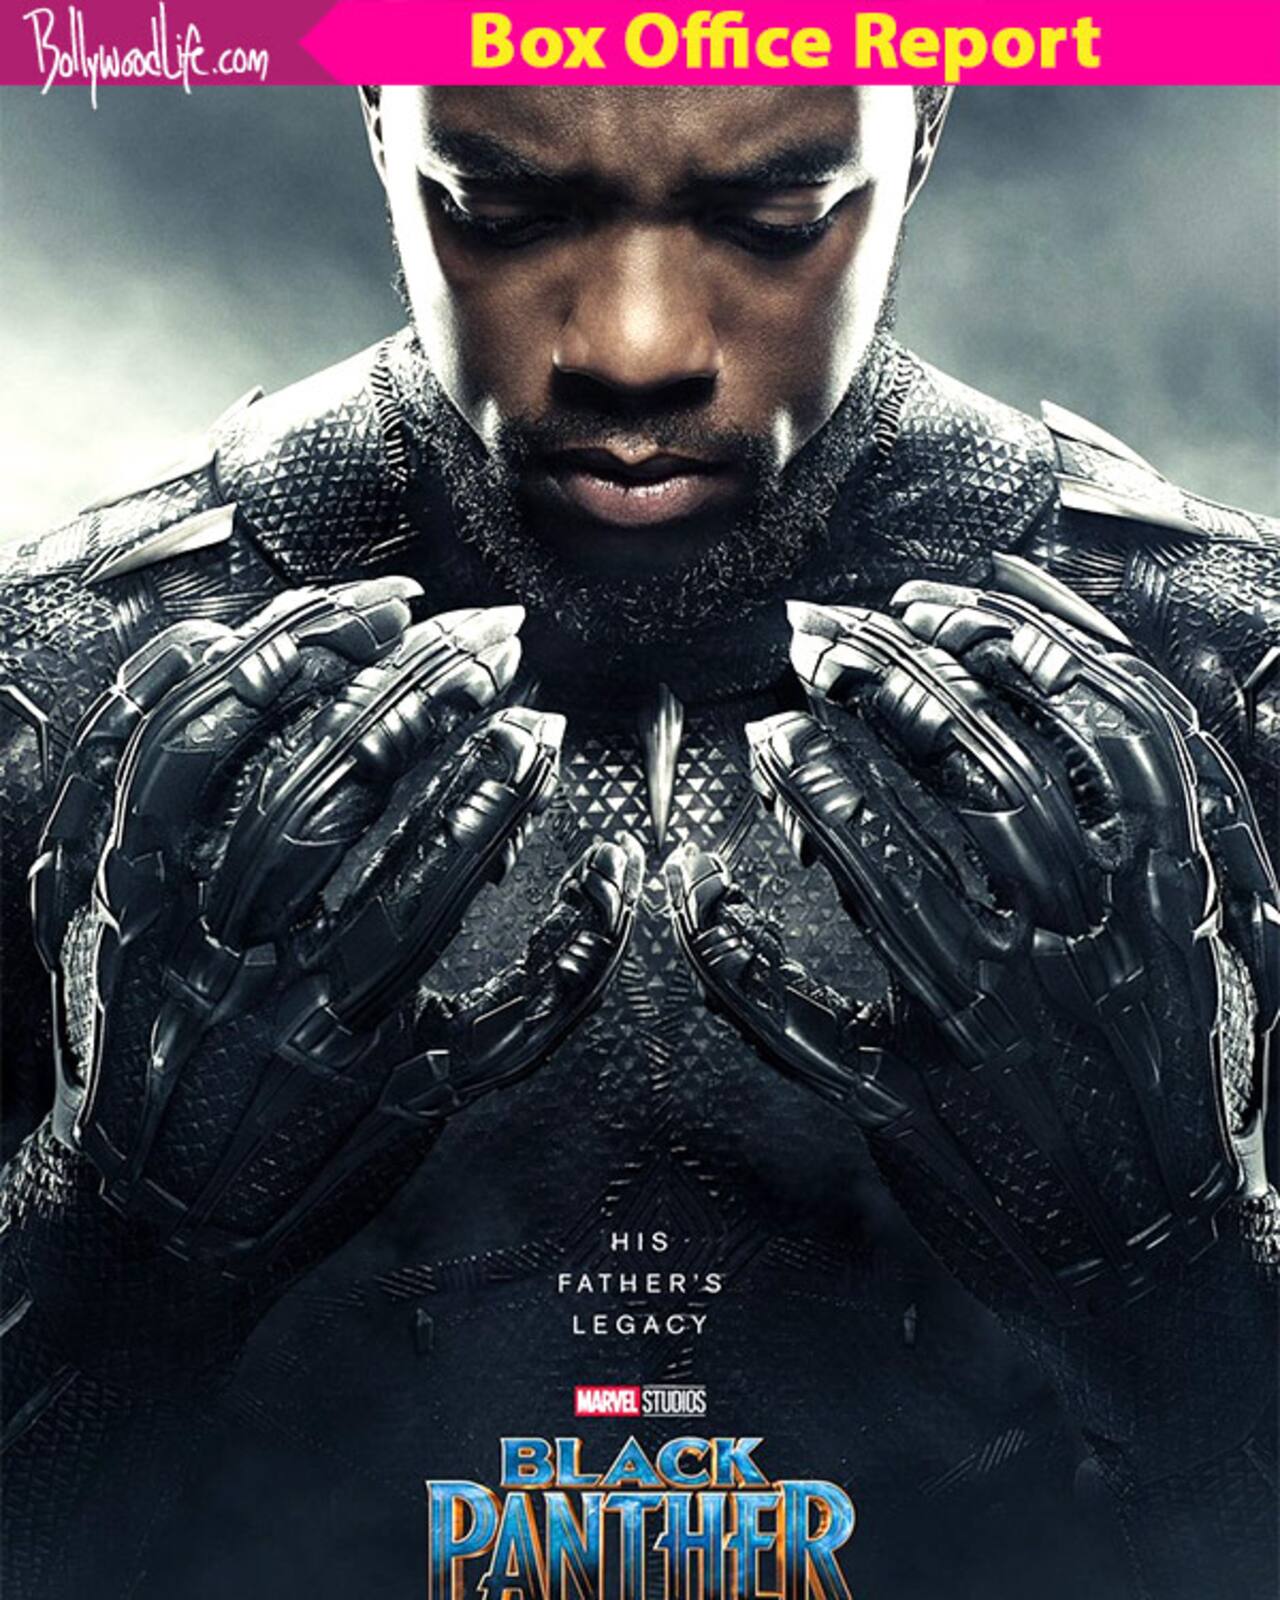 Black Panther box office collection day 4: The Marvel film continues its  record breaking run in USA, rakes in $ million - Bollywood News &  Gossip, Movie Reviews, Trailers & Videos at 